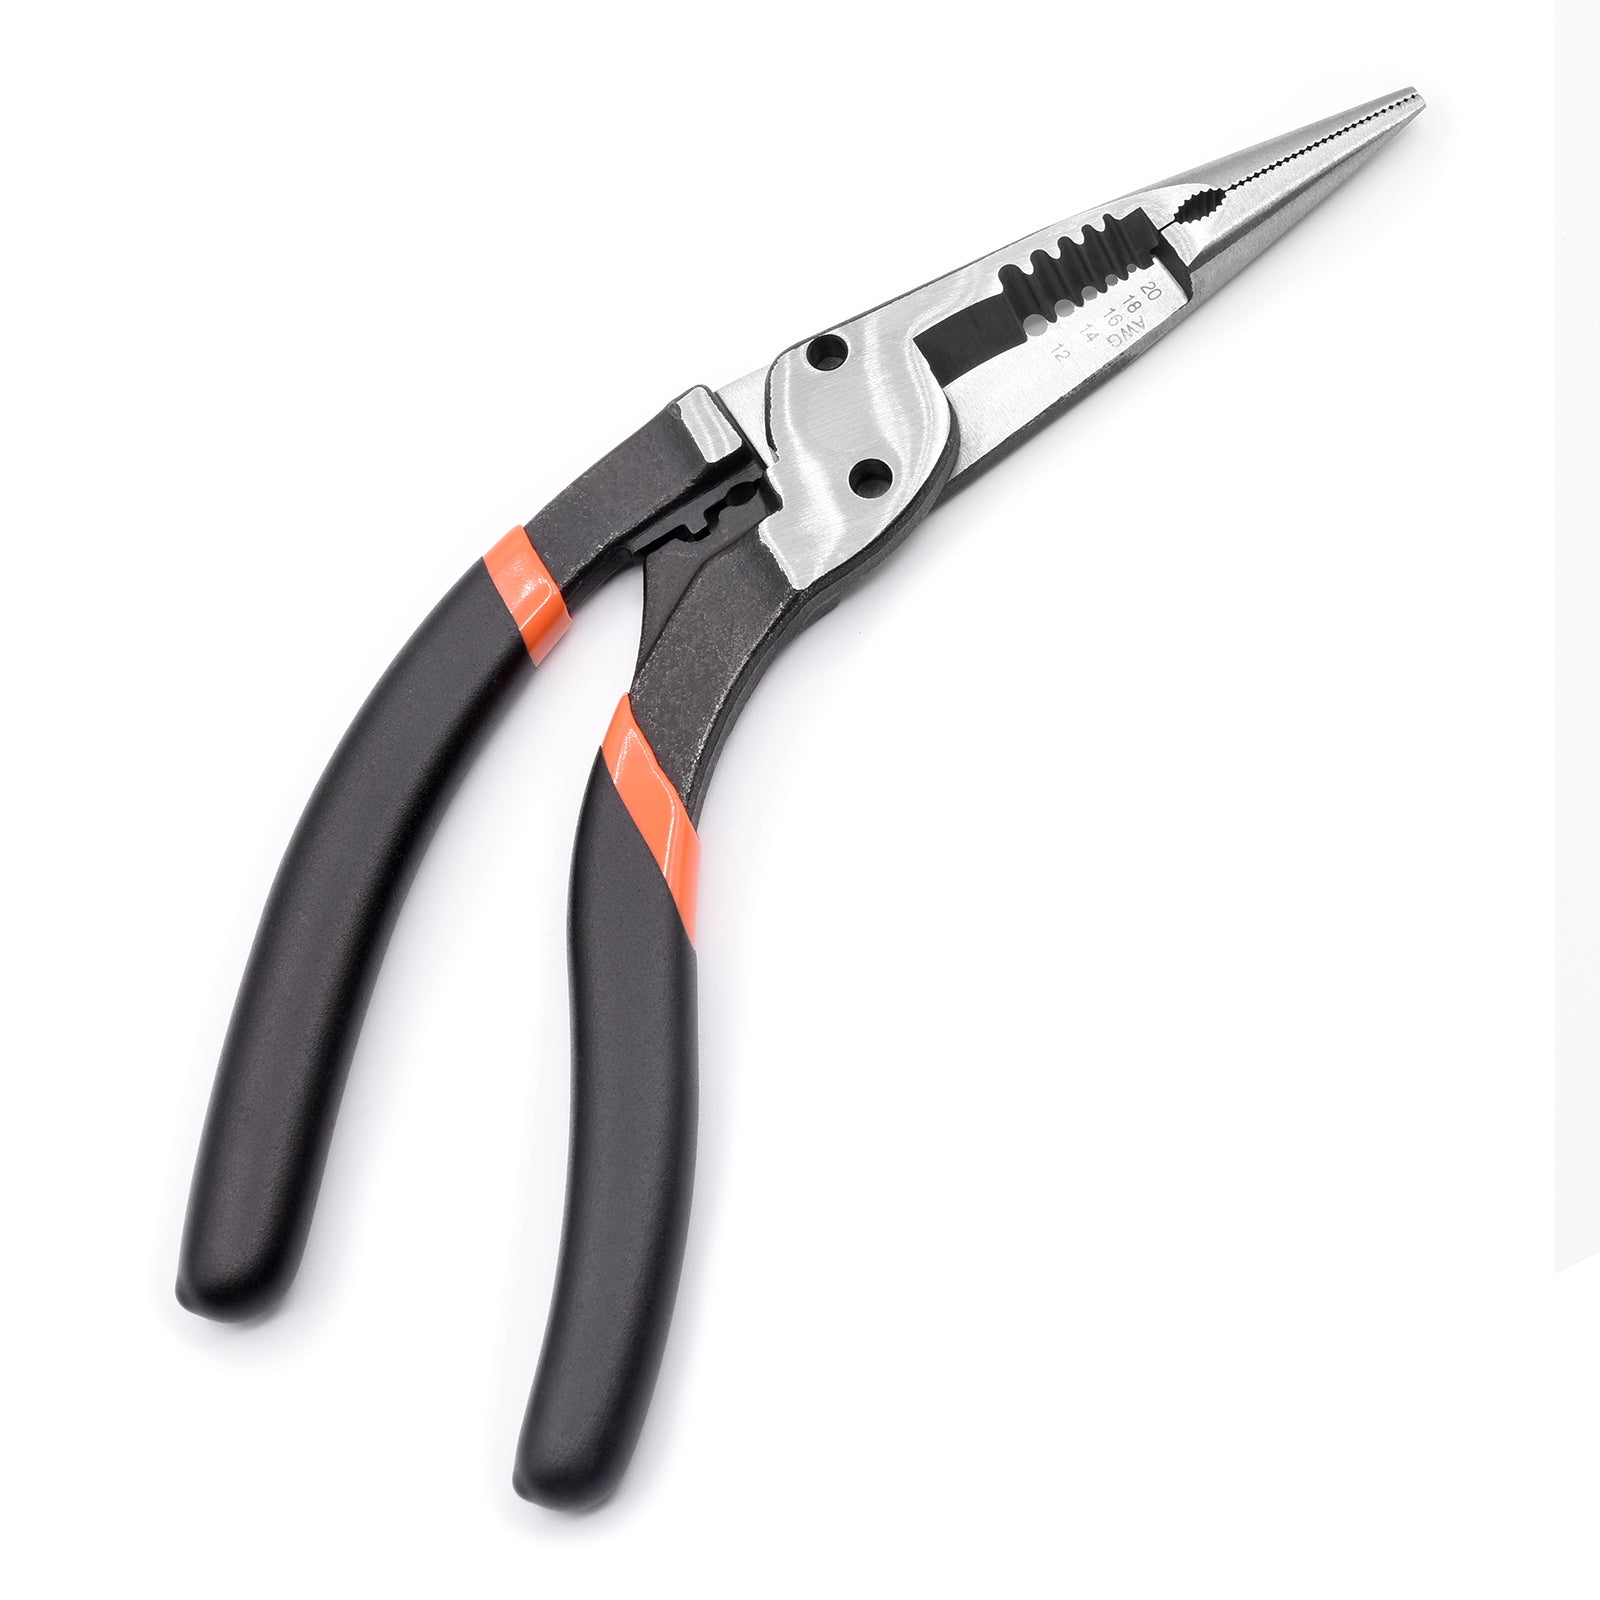 Fujiya Electrician's Plier with Ergonomic Curved Handles - Micro - Mark Nippers